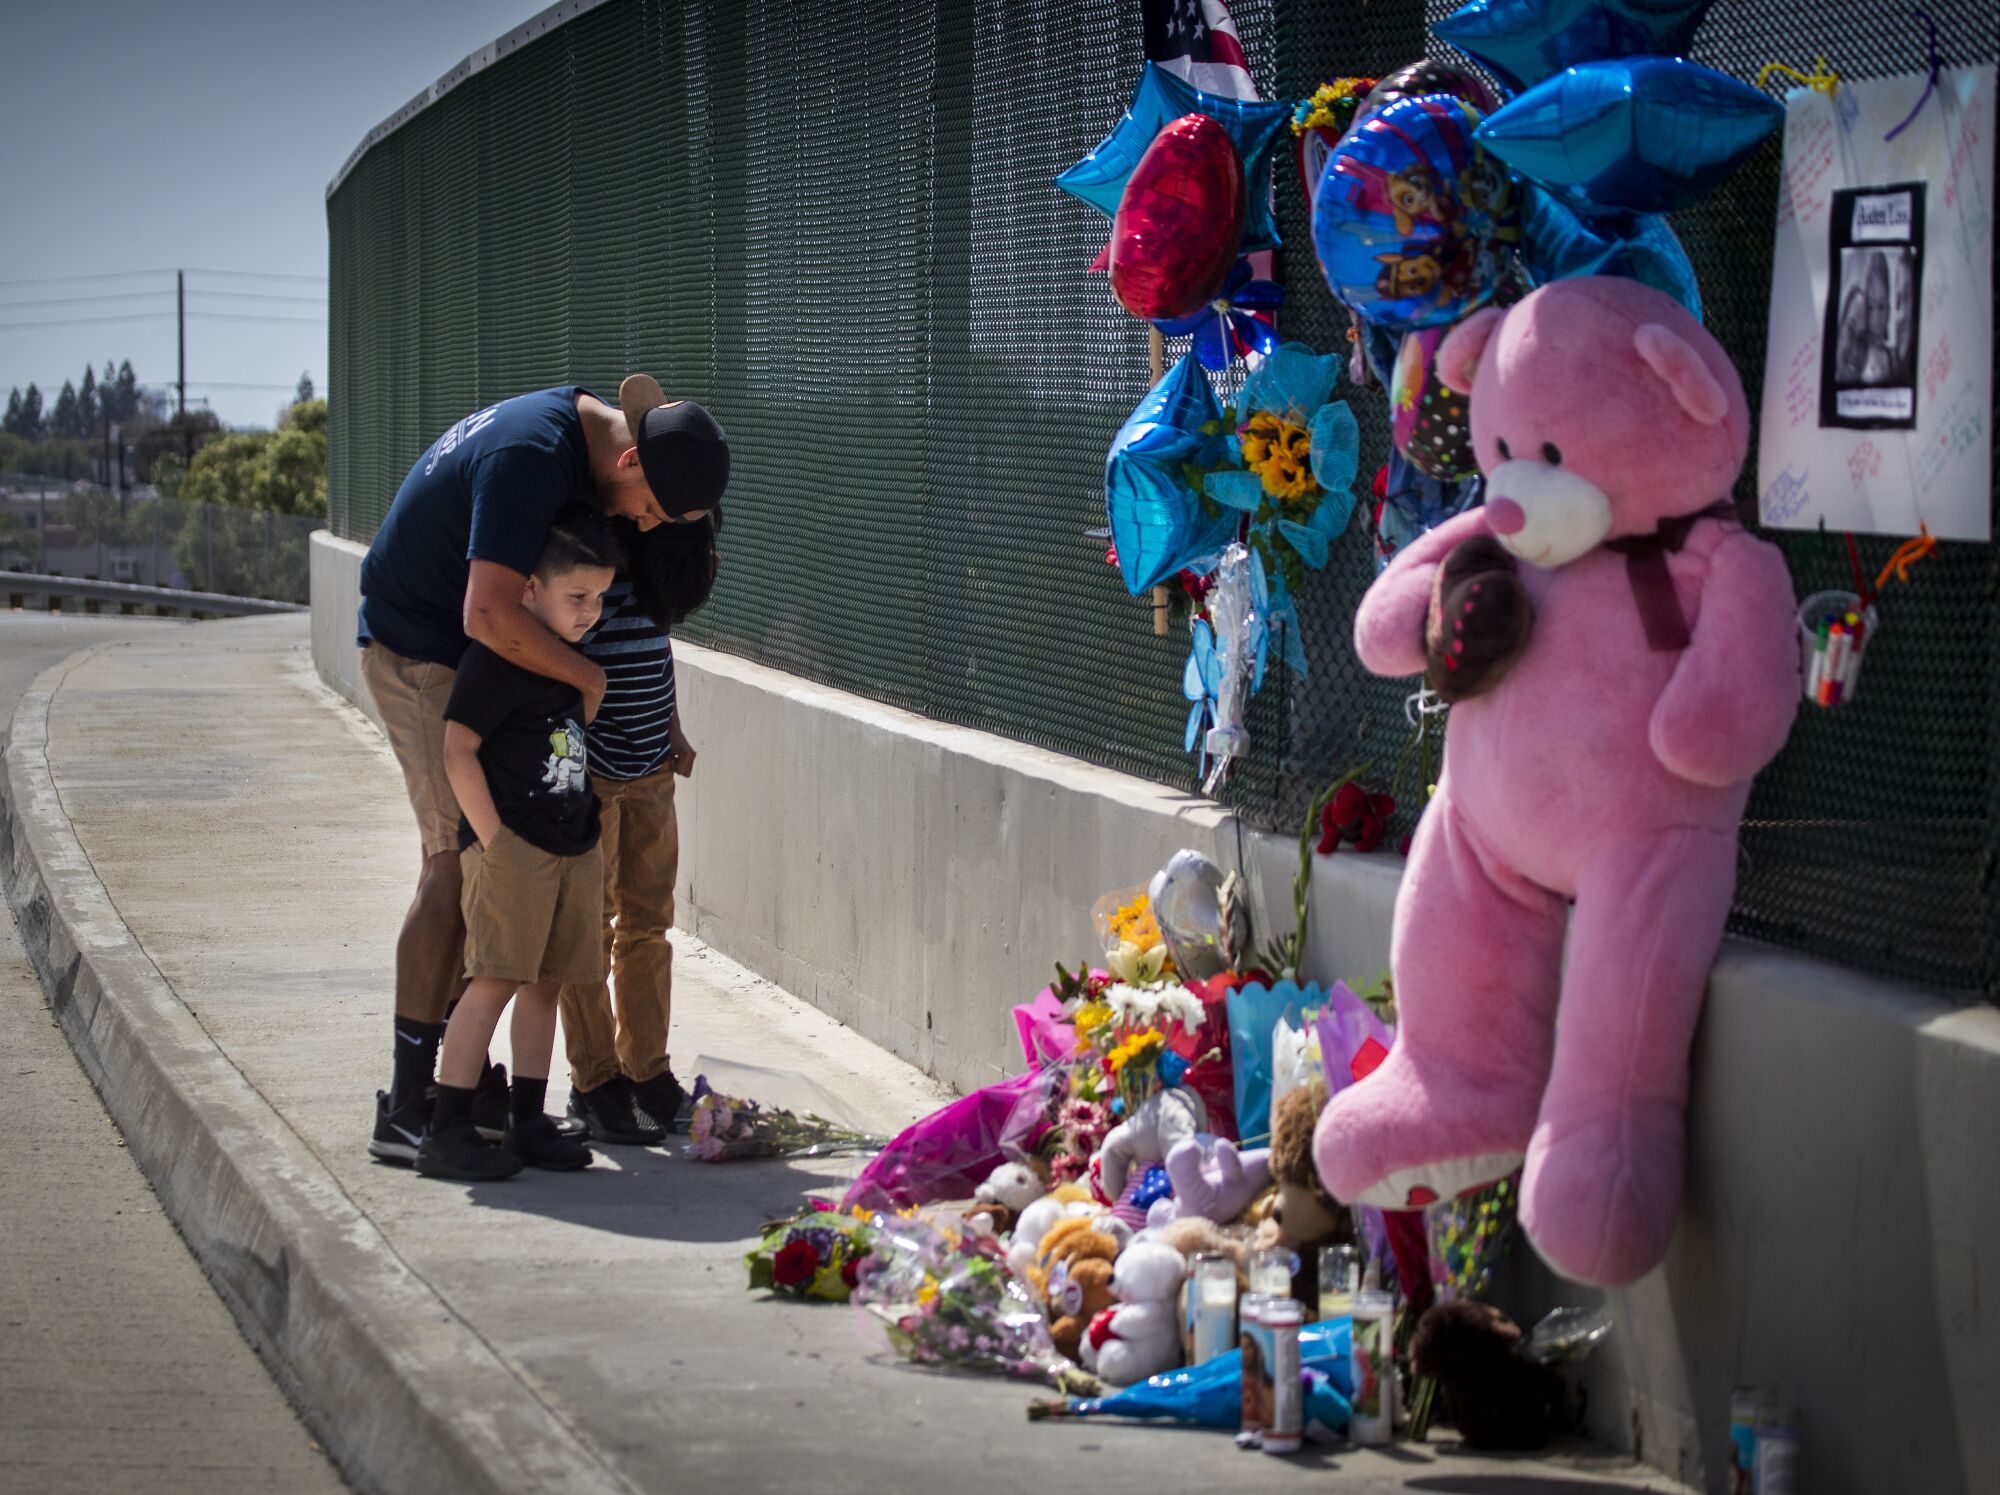 George Aguilar of Anaheim prays with his sons, Jackson, 7, and Jacob, 11, at Aiden Leos' memorial in Orange.